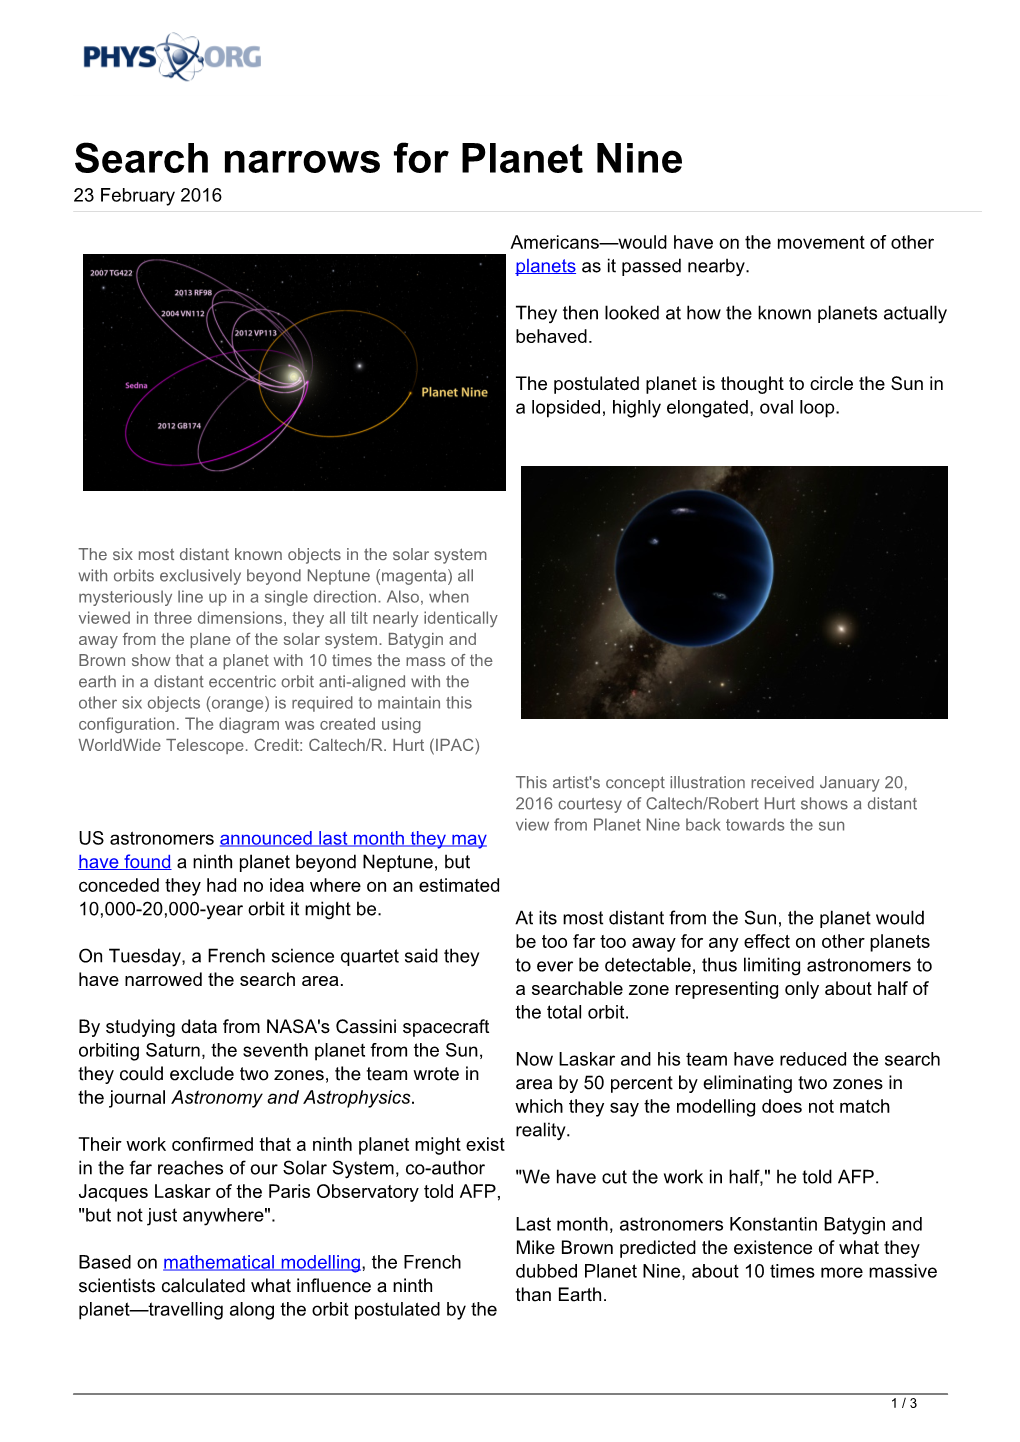 Search Narrows for Planet Nine 23 February 2016